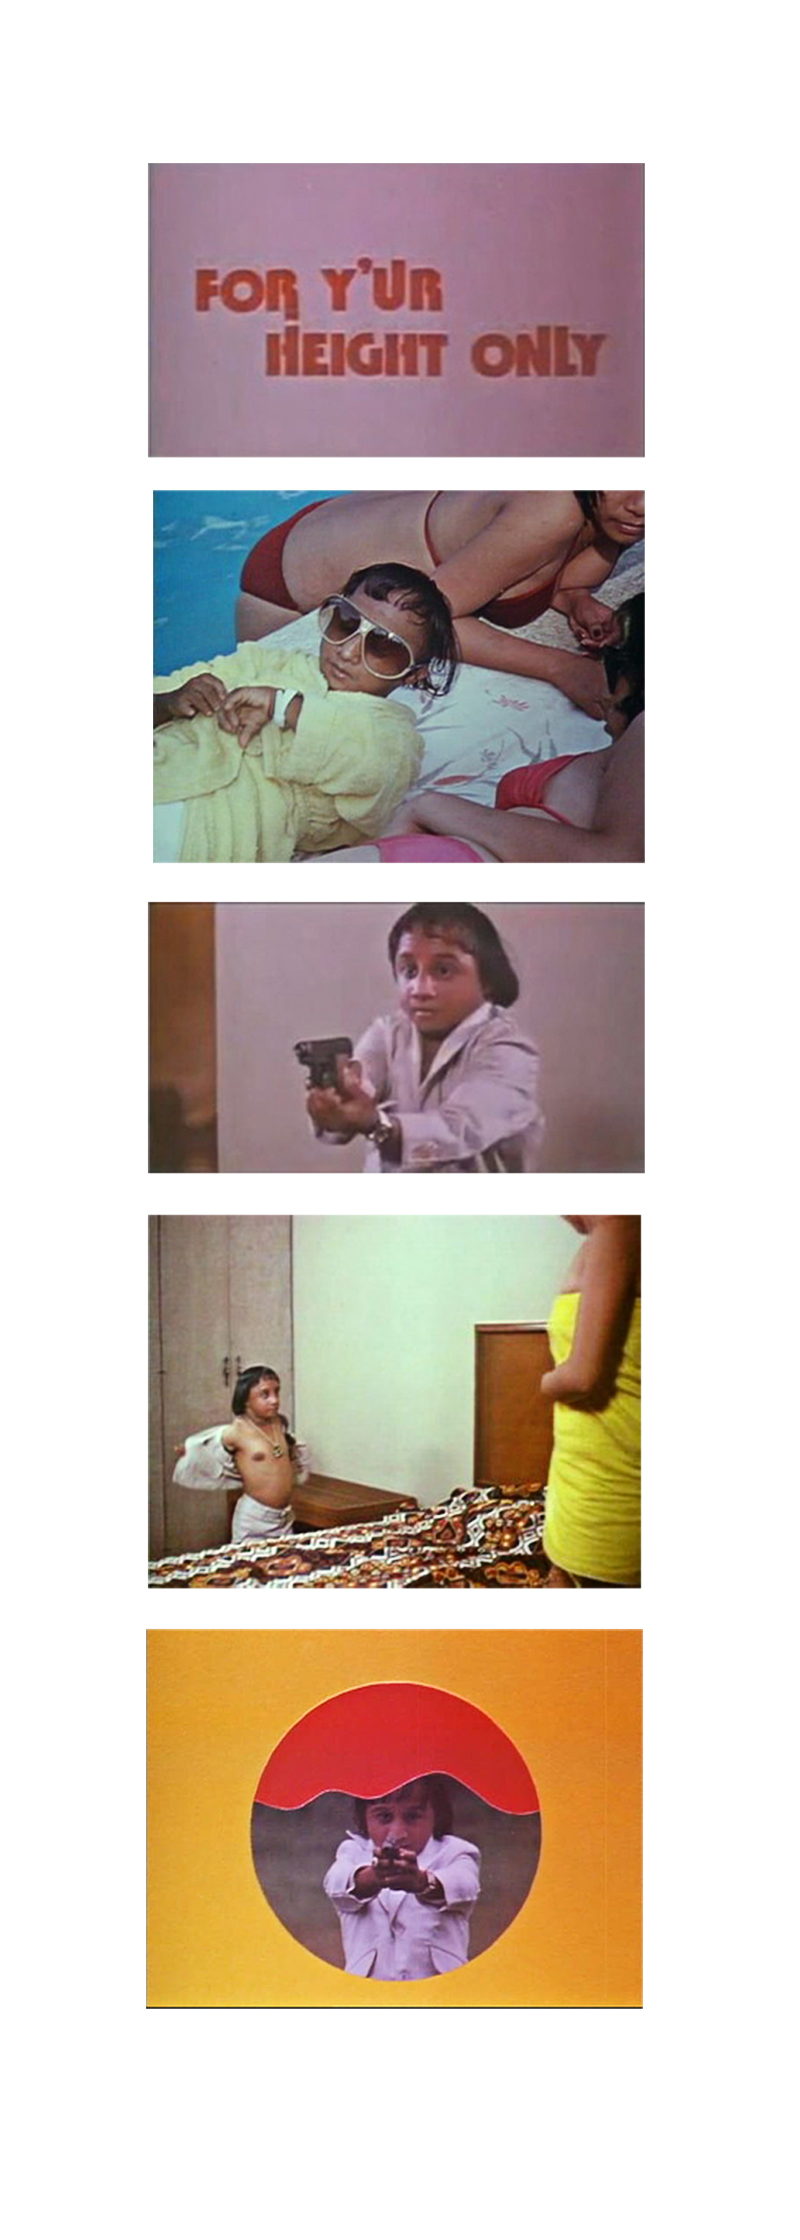 weng weng for your height onl agent 00 james bond Spoof eddie nicart philippine exploitation films shintaro lopez